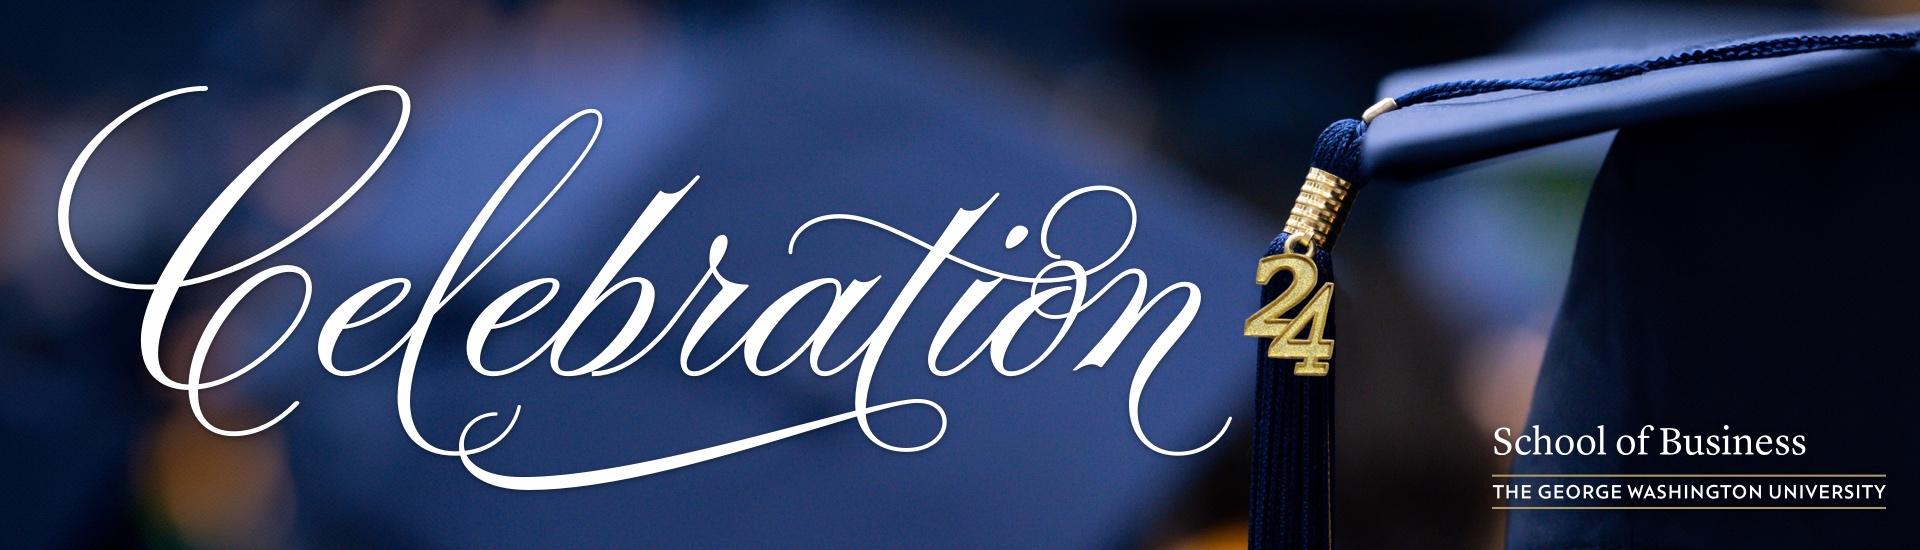 GWSB 2024 Commencement header. Image shows a close-up of a graduation cap tassel with a golden "24" pin attached. The word "celebration" is written across the image in large cursive.